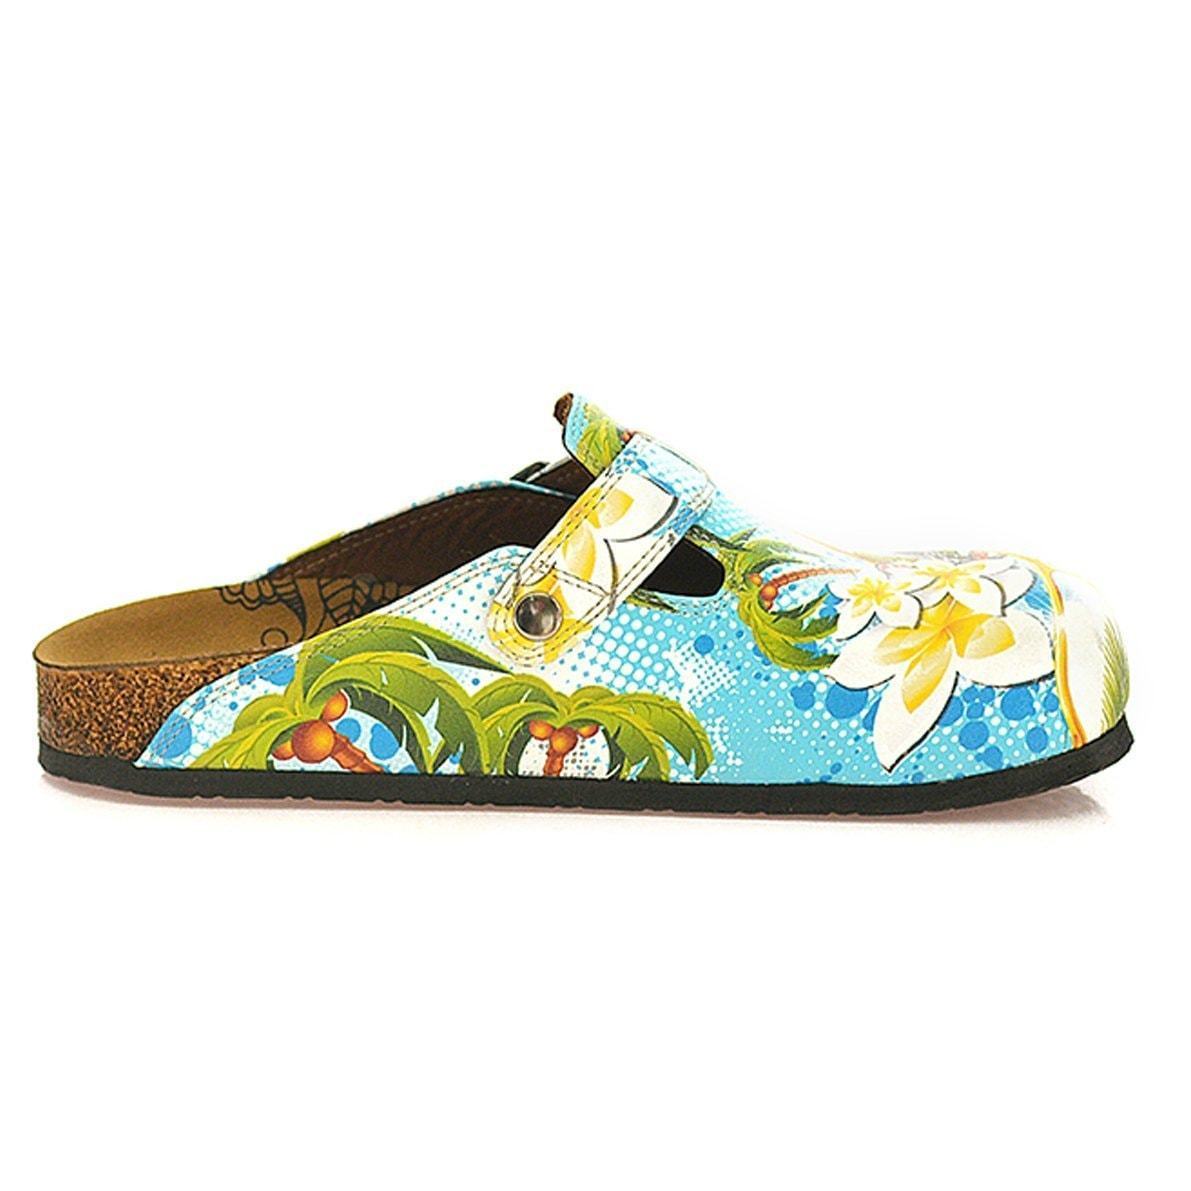 Blue & Yellow Tropical Clogs WCAL337, Goby, CALCEO Clogs 